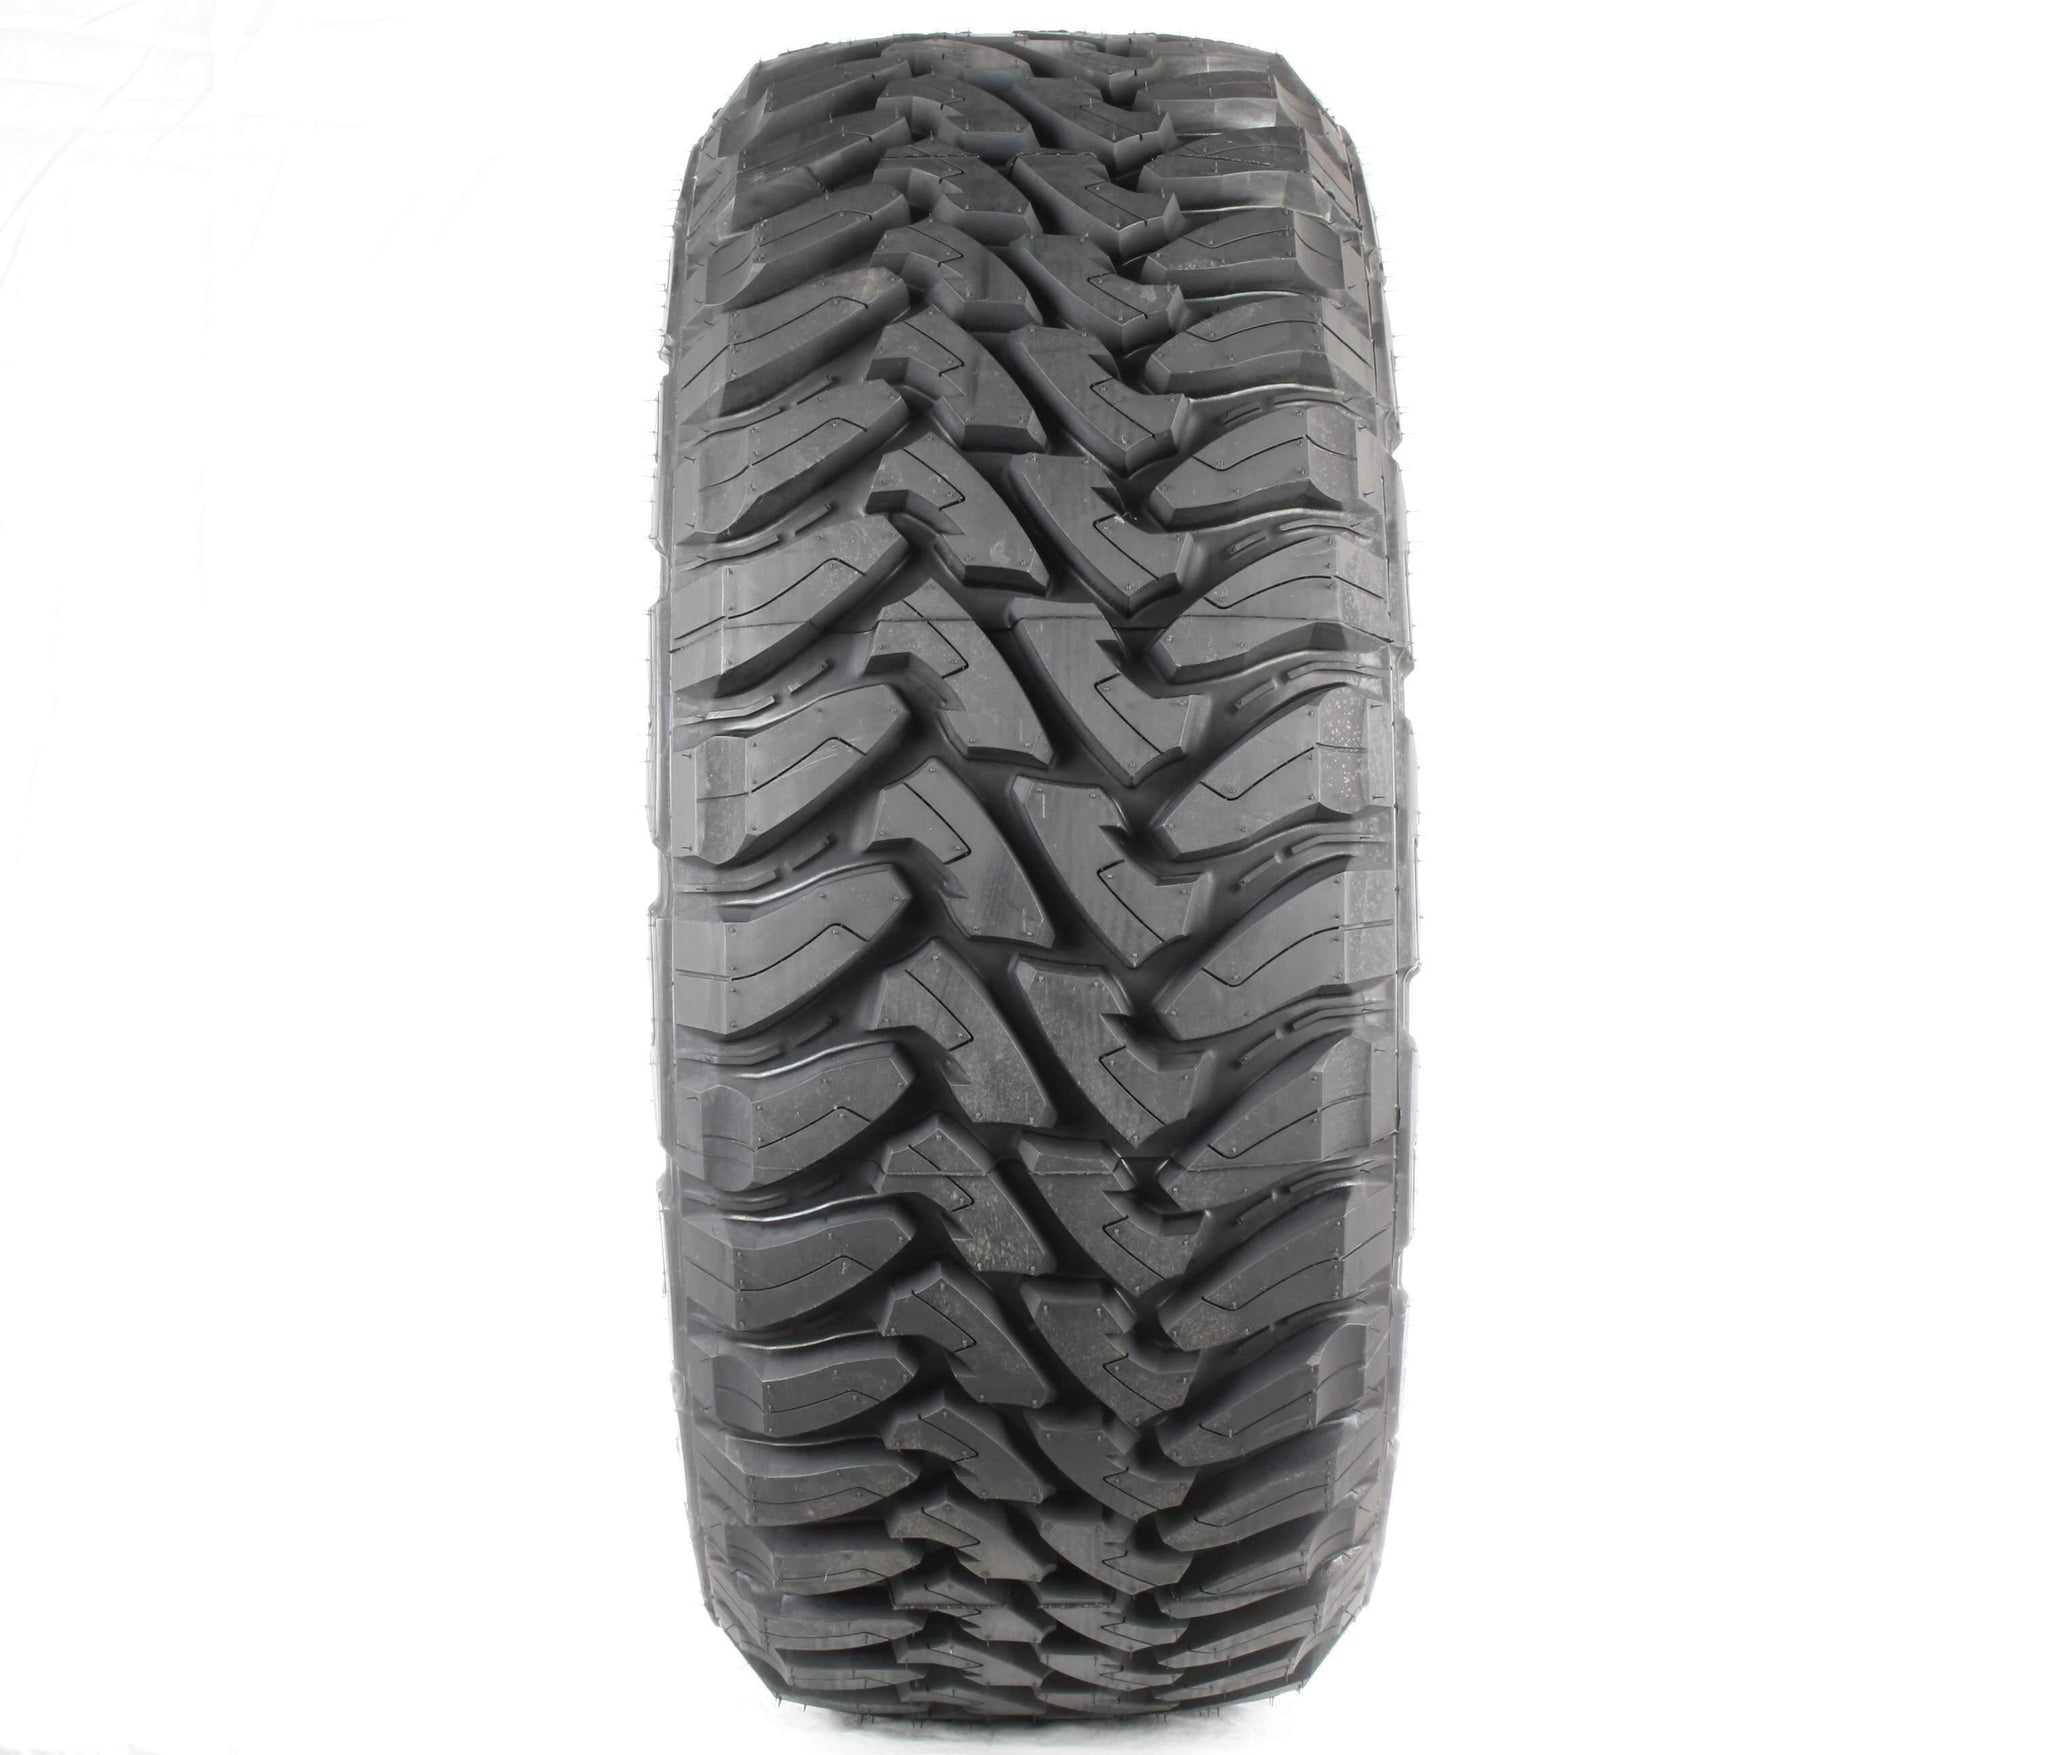 TOYO TIRES OPEN COUNTRY M/T LT295/55R20 (33X12.2R 20) Tires